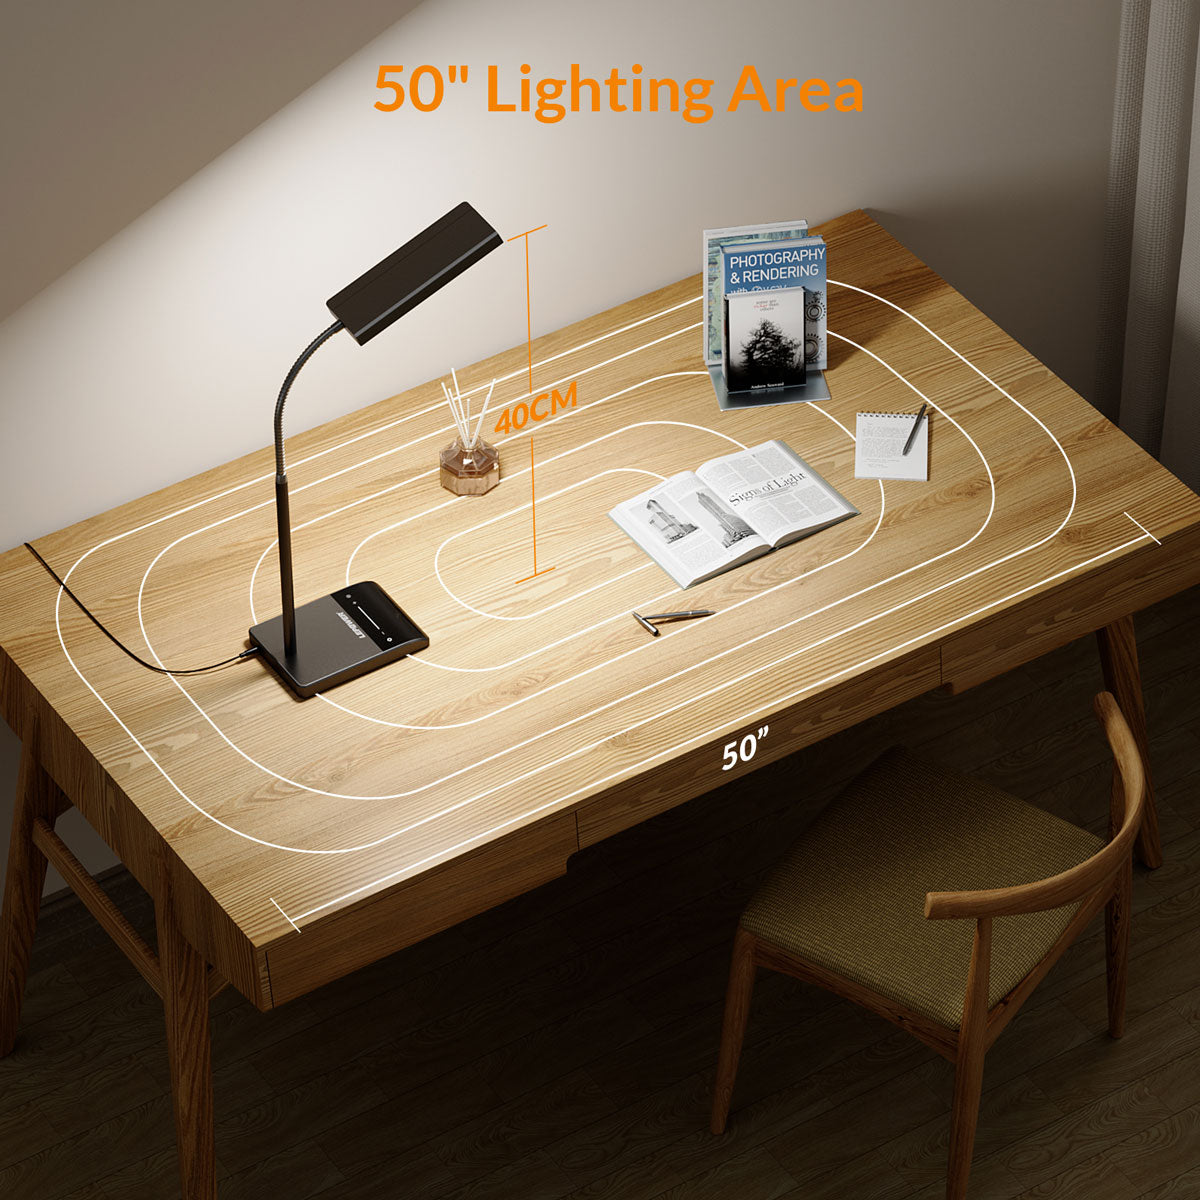 Gooseneck Eye-caring LED Desk Light with Touch Control